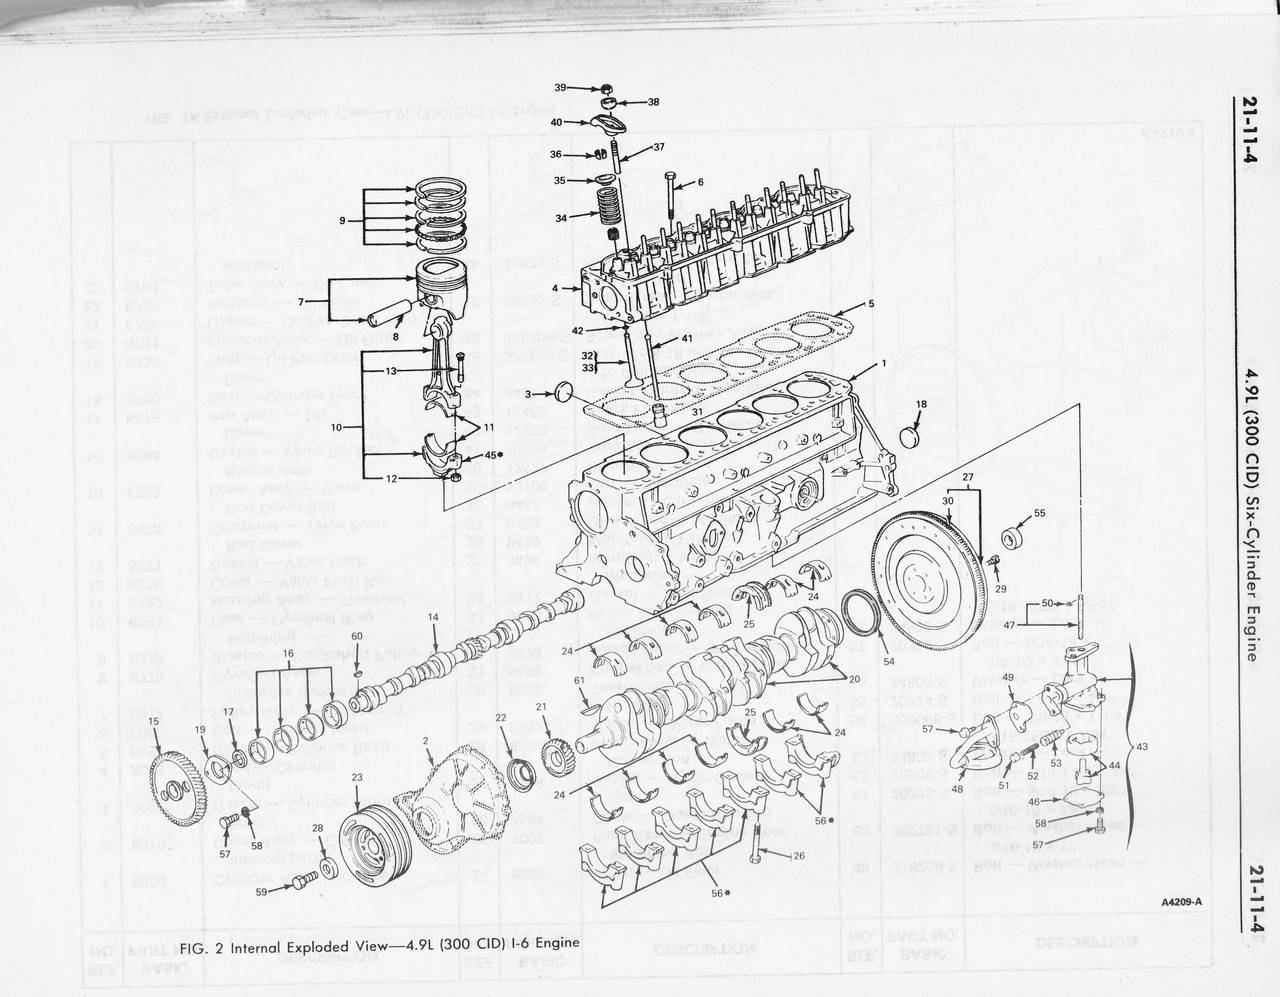 1978 Ford Shop Manual Vol 2 - Group 21 - Gasoline Engines - Ford Truck